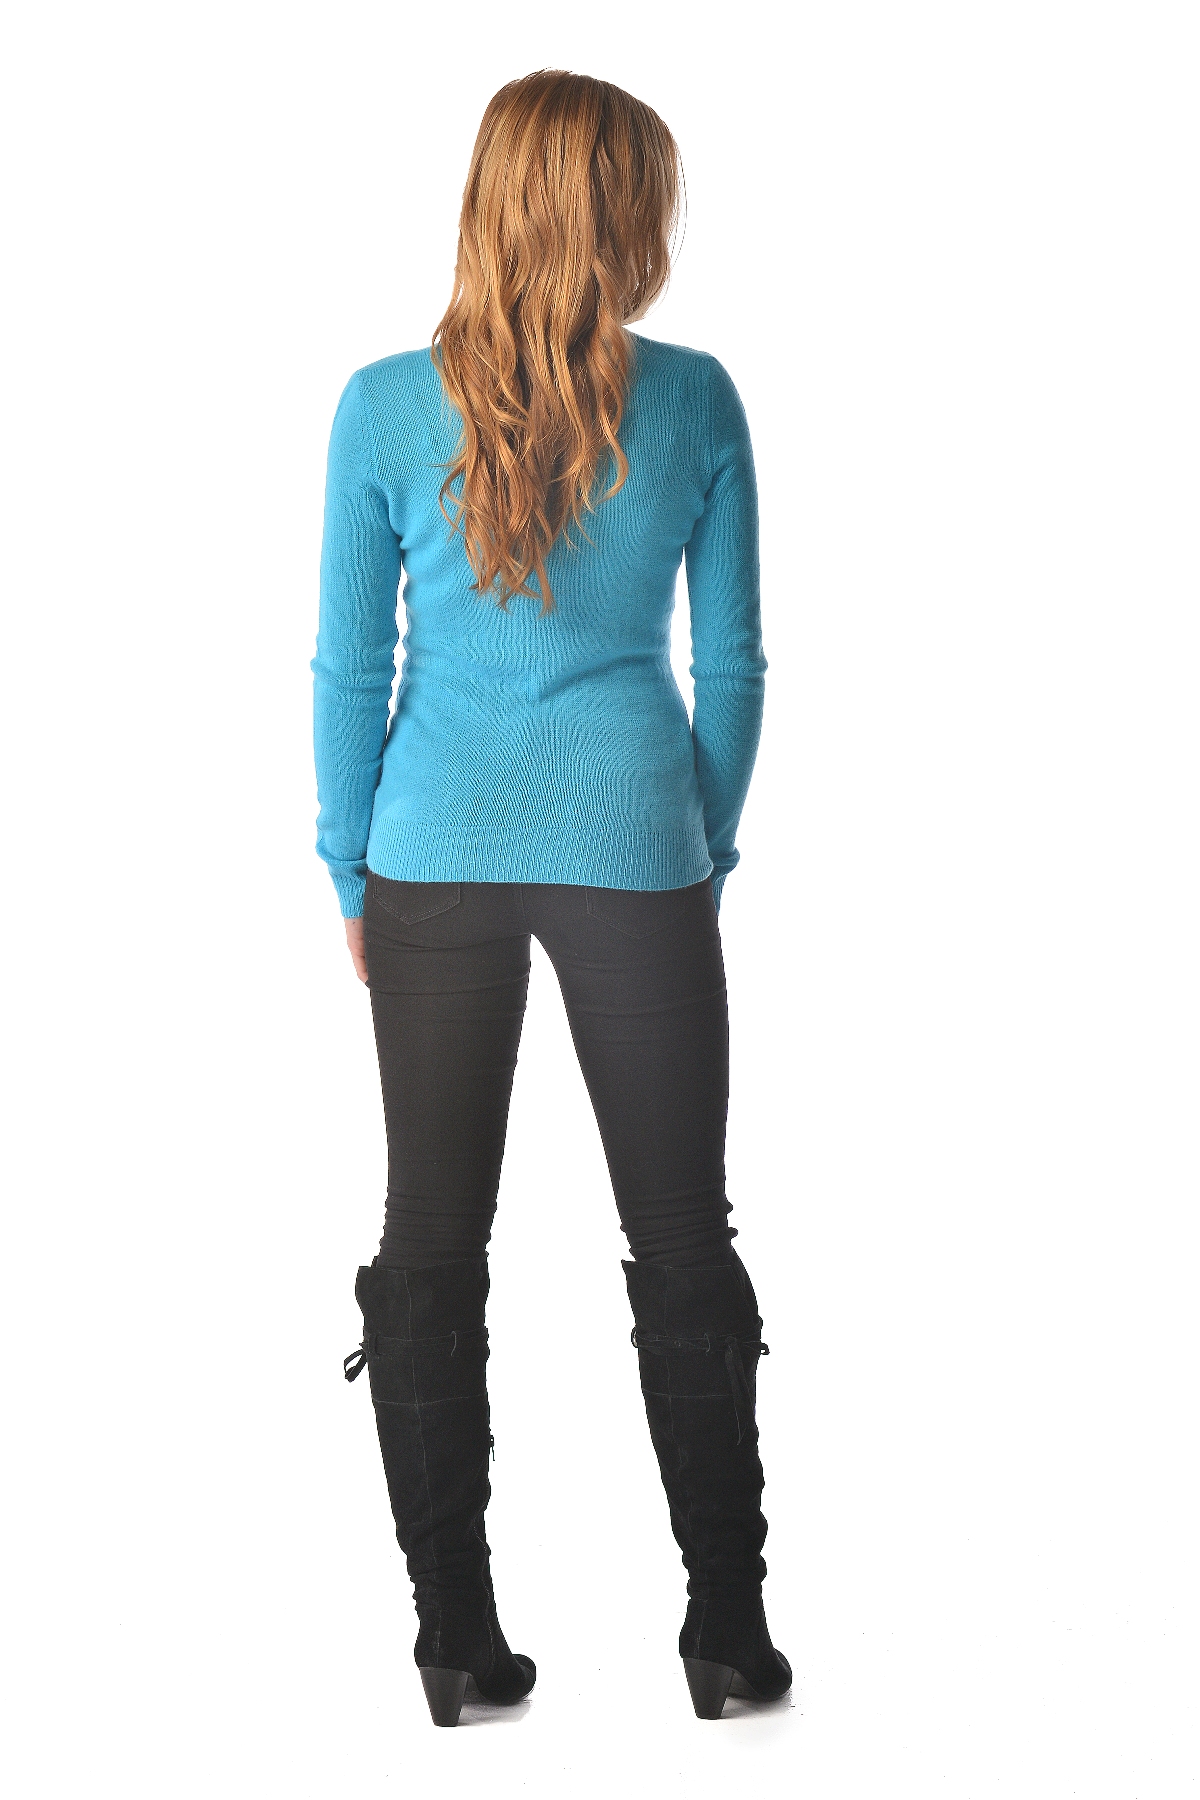 Pure Cashmere V-Neck Spring Sweater for Women (Turquoise Blue, Small)